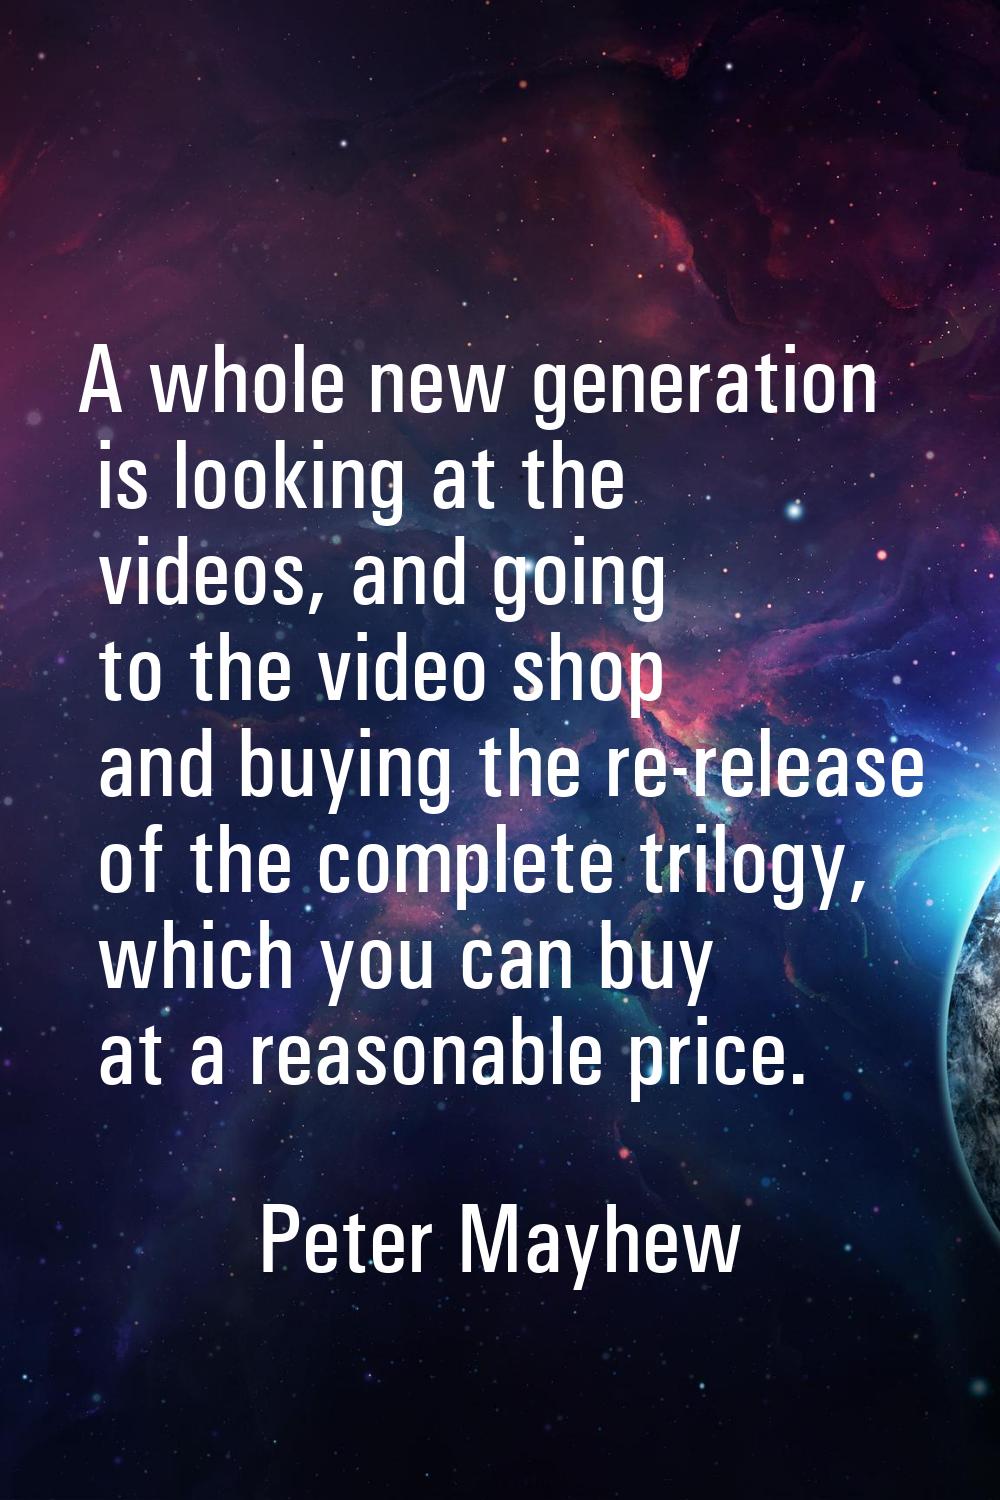 A whole new generation is looking at the videos, and going to the video shop and buying the re-rele